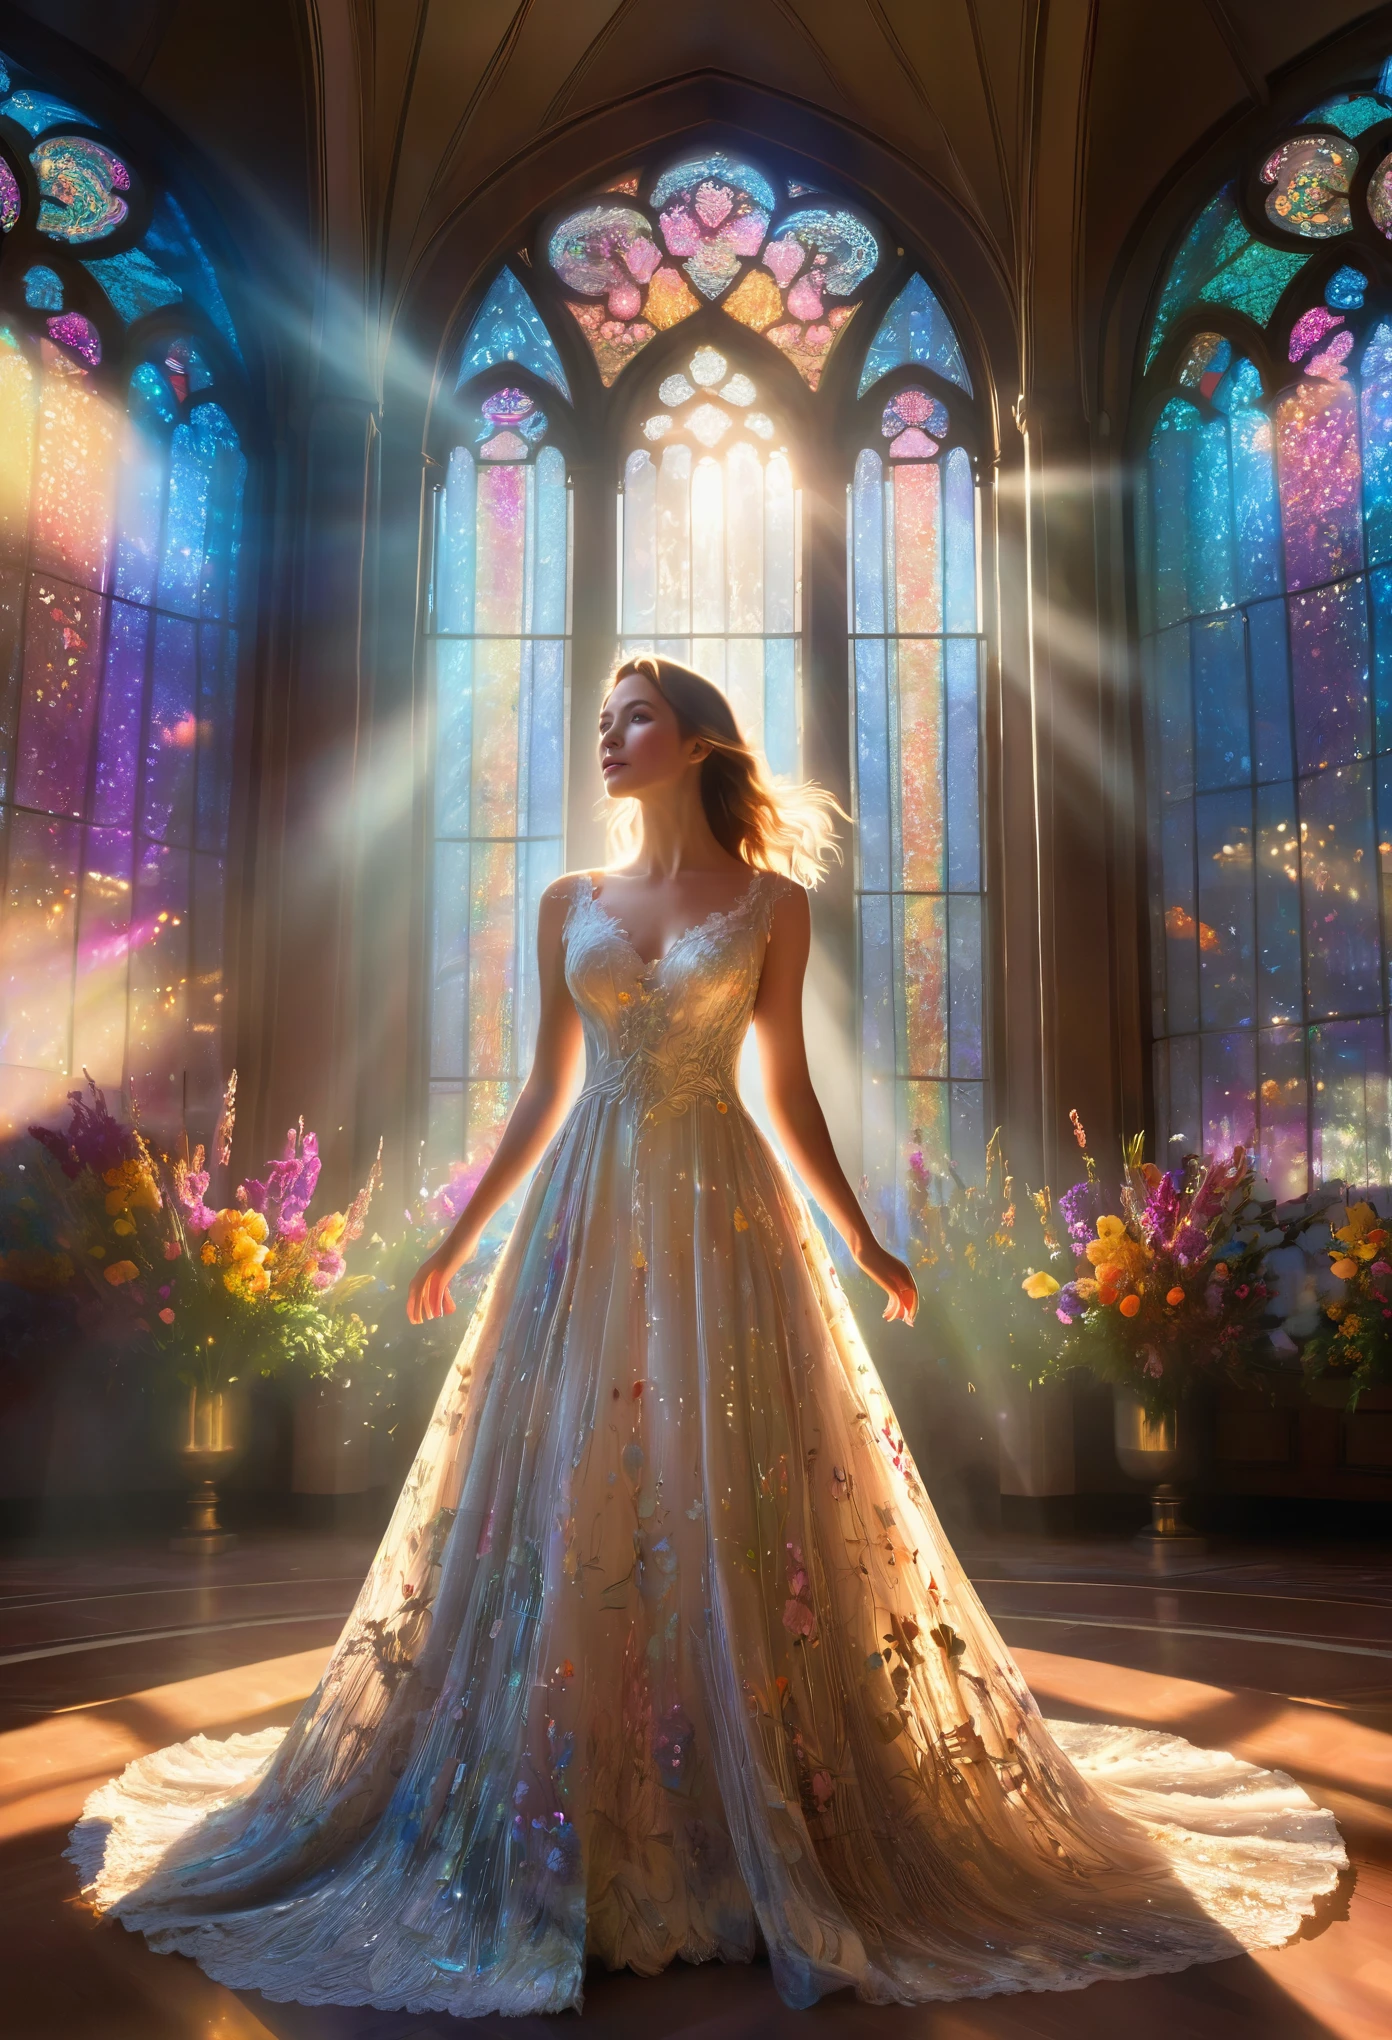 The ballroom, the sunlight pouring down, the colorful flowers, a woman in evening dress standing, a lace dress with floral patterns, rays of light pouring in through the large stained glass windows, flowers and light particles in the air drifting, voluminous lighting, a fantastic atmosphere,
epic realistic, intricate details, hyper detailed, cinematic, rim light, 